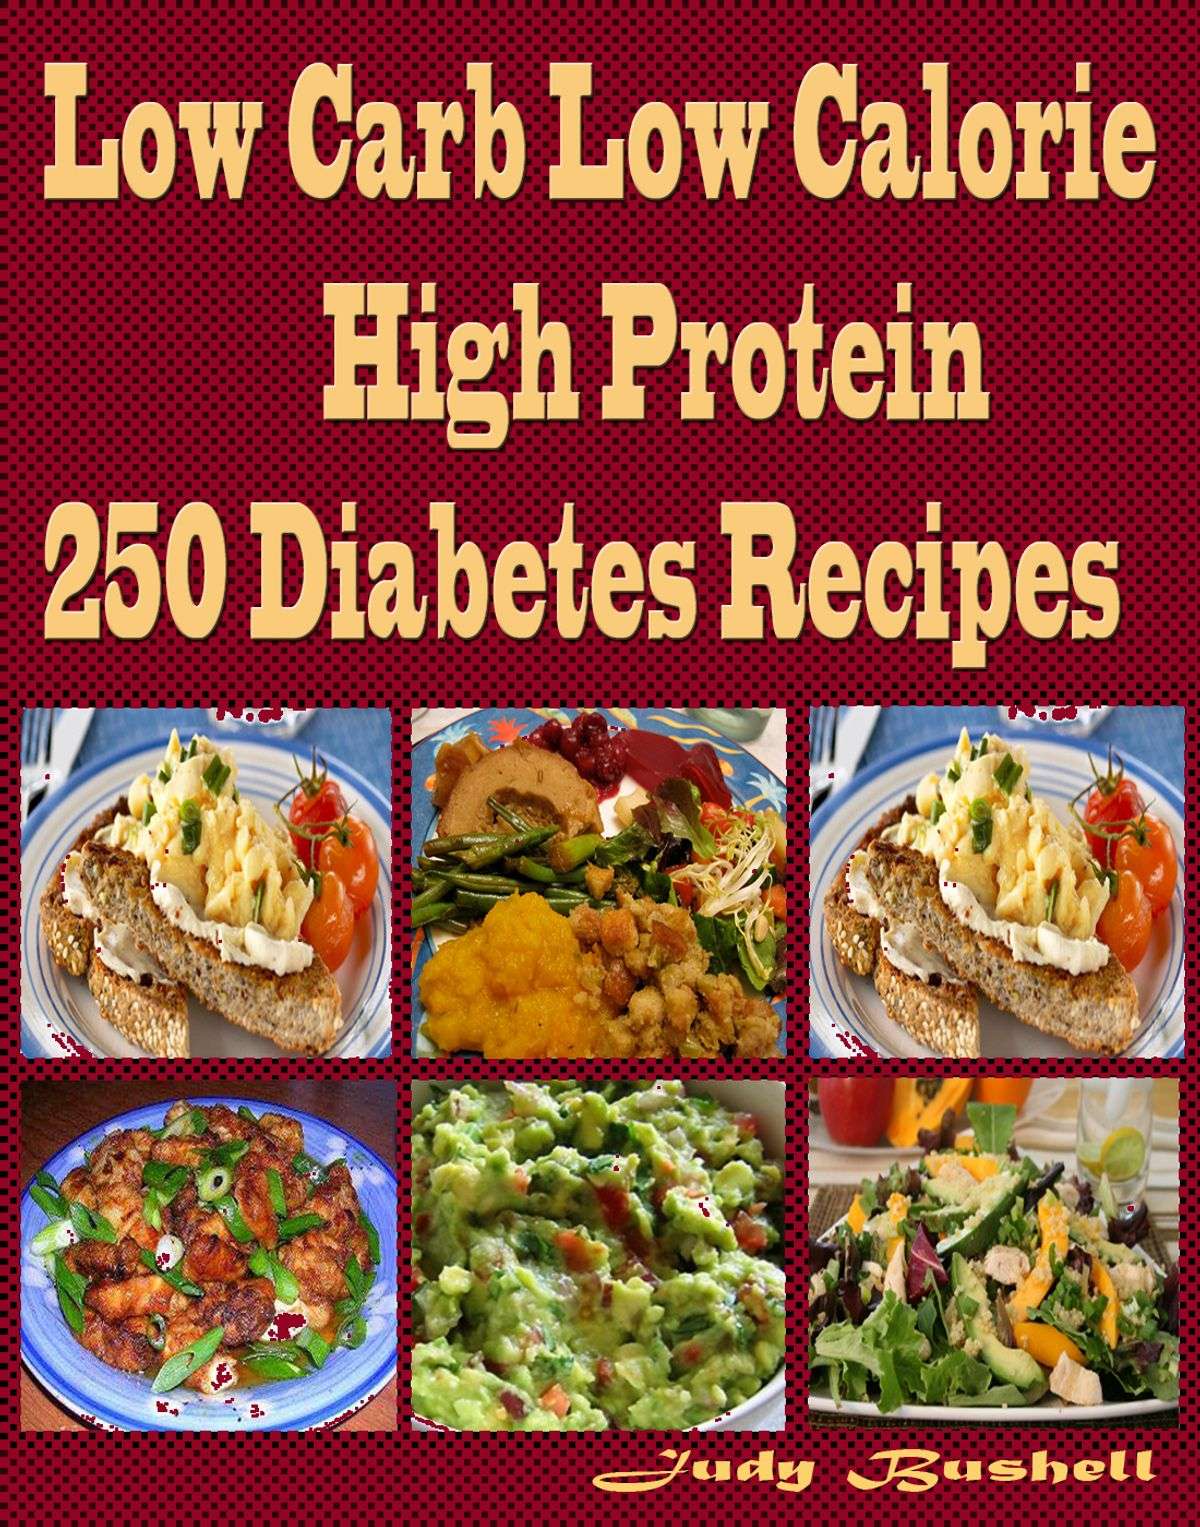 Low Carb Low Calorie High Protein 250 Diabetes Recipes ...